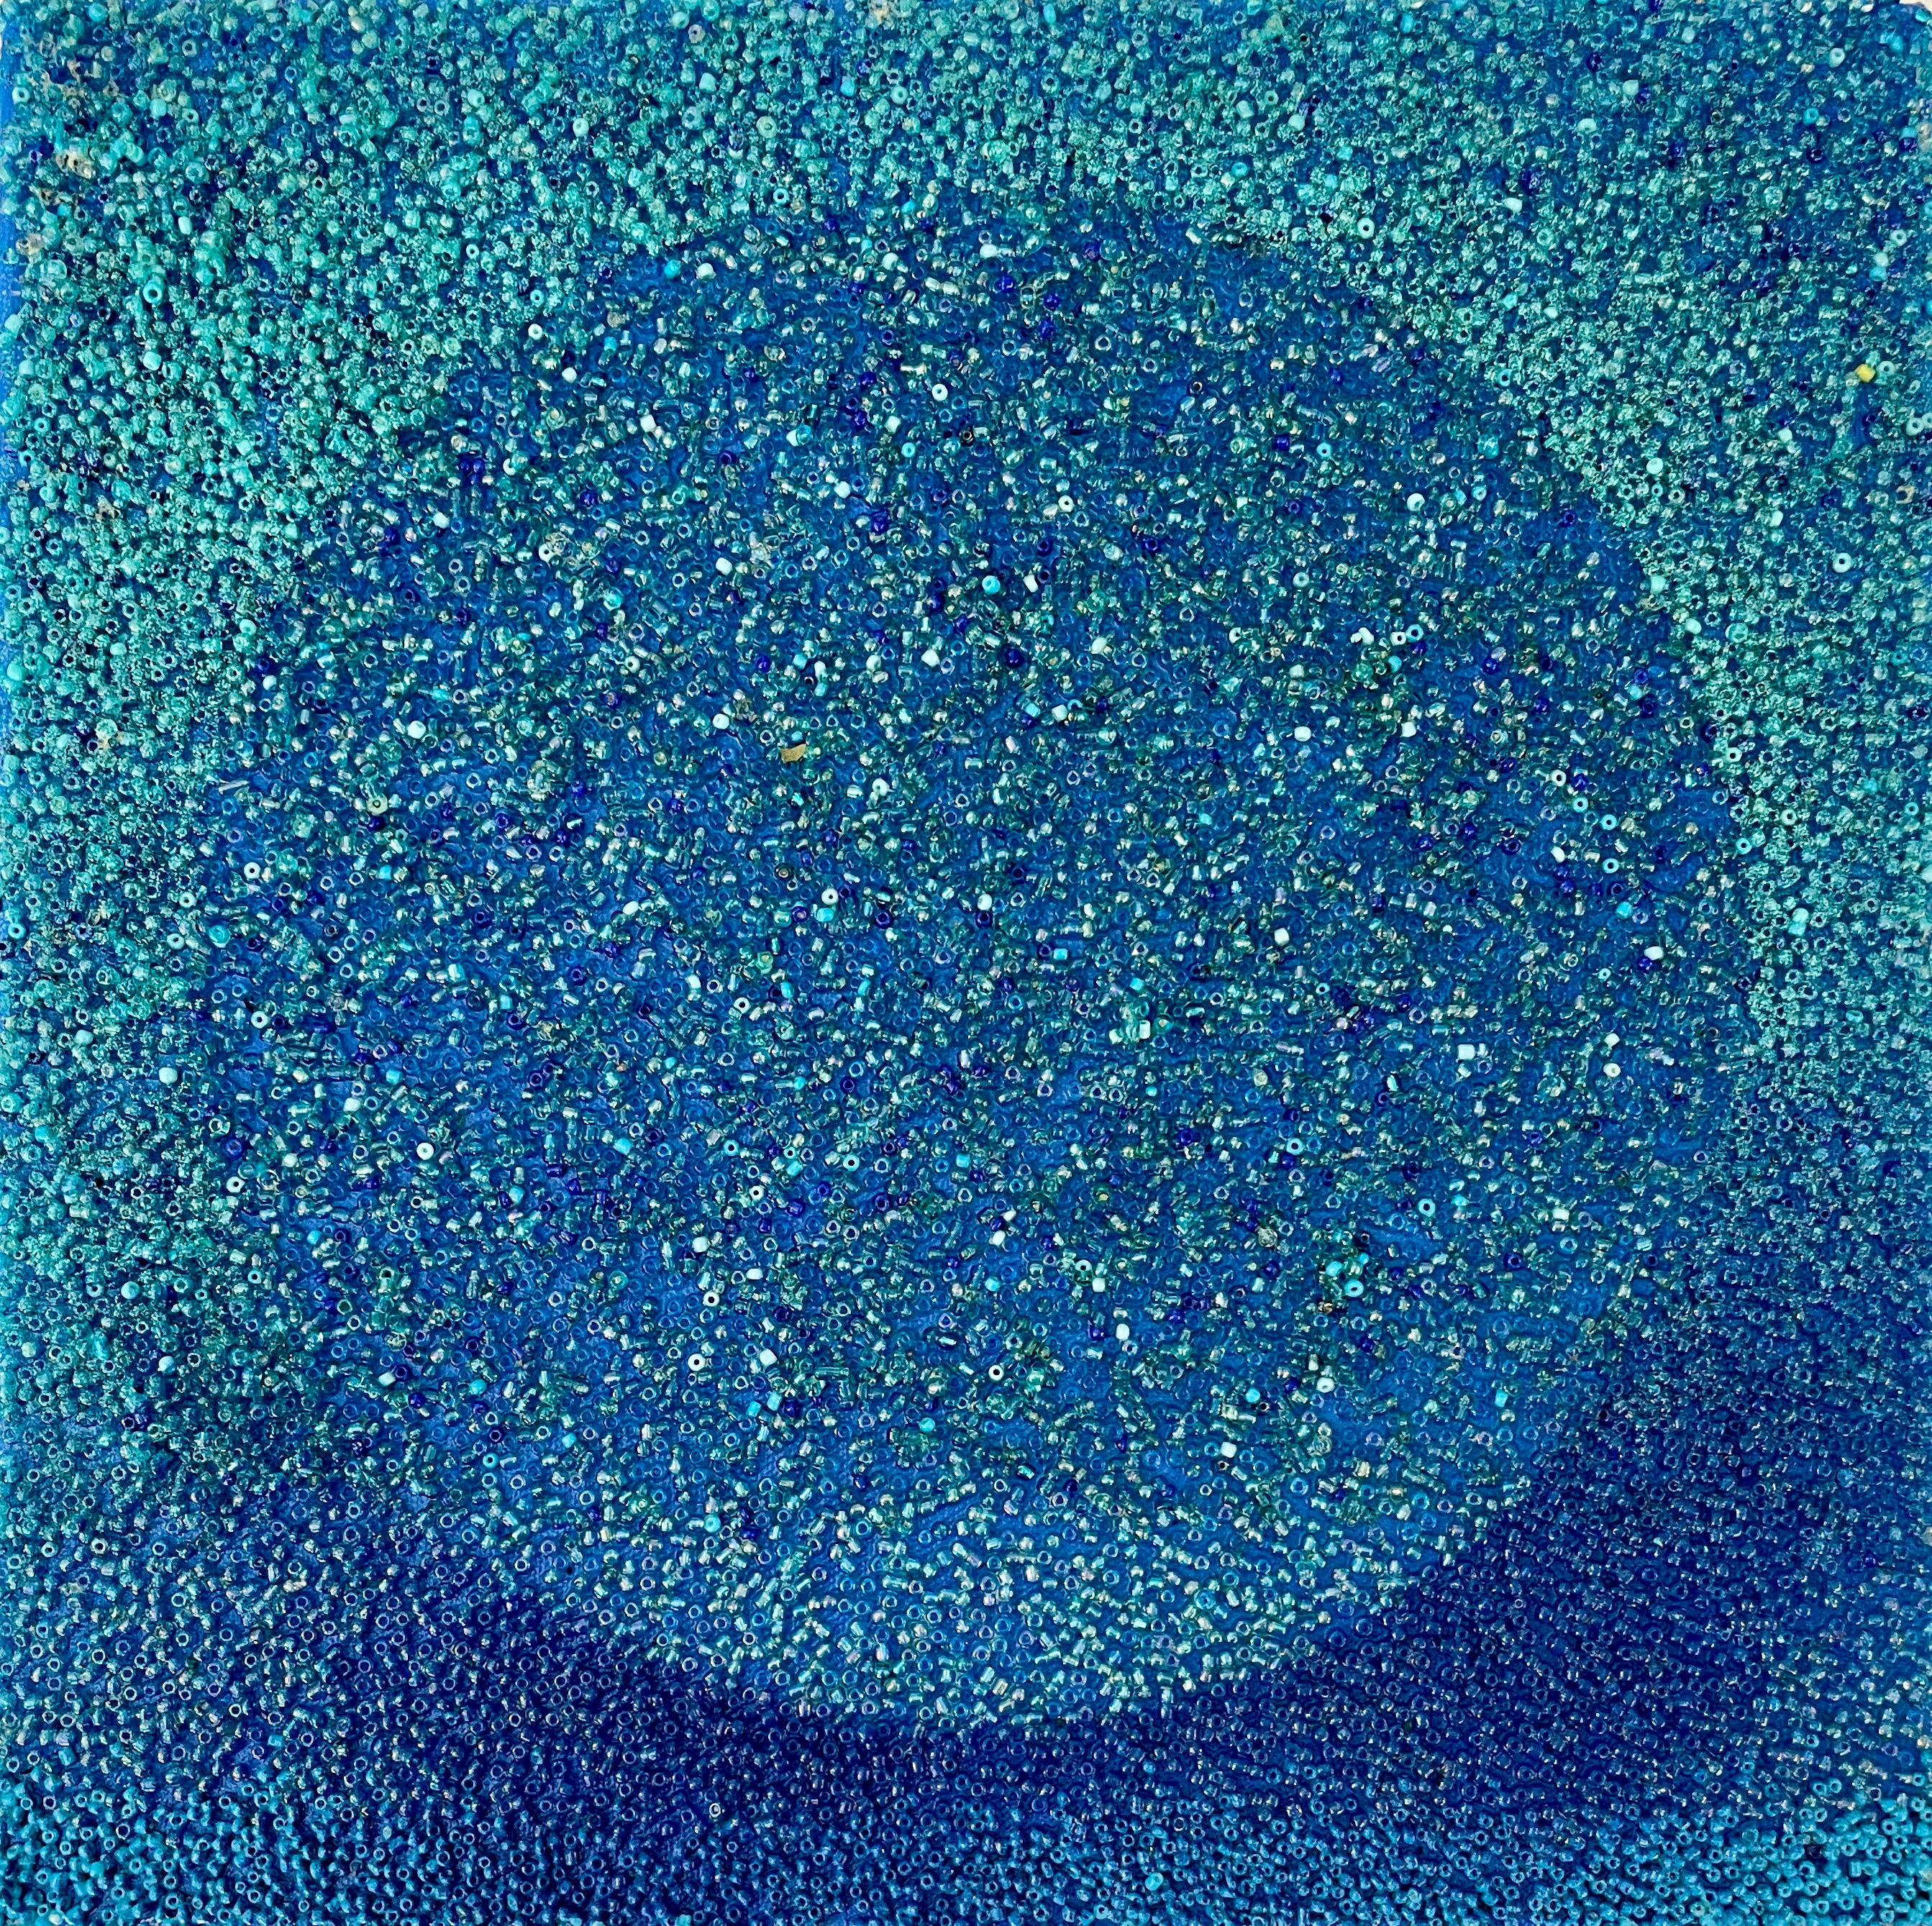 100 Lives: abstract painting on canvas in blue & gray w/ circles & grid For Sale 2